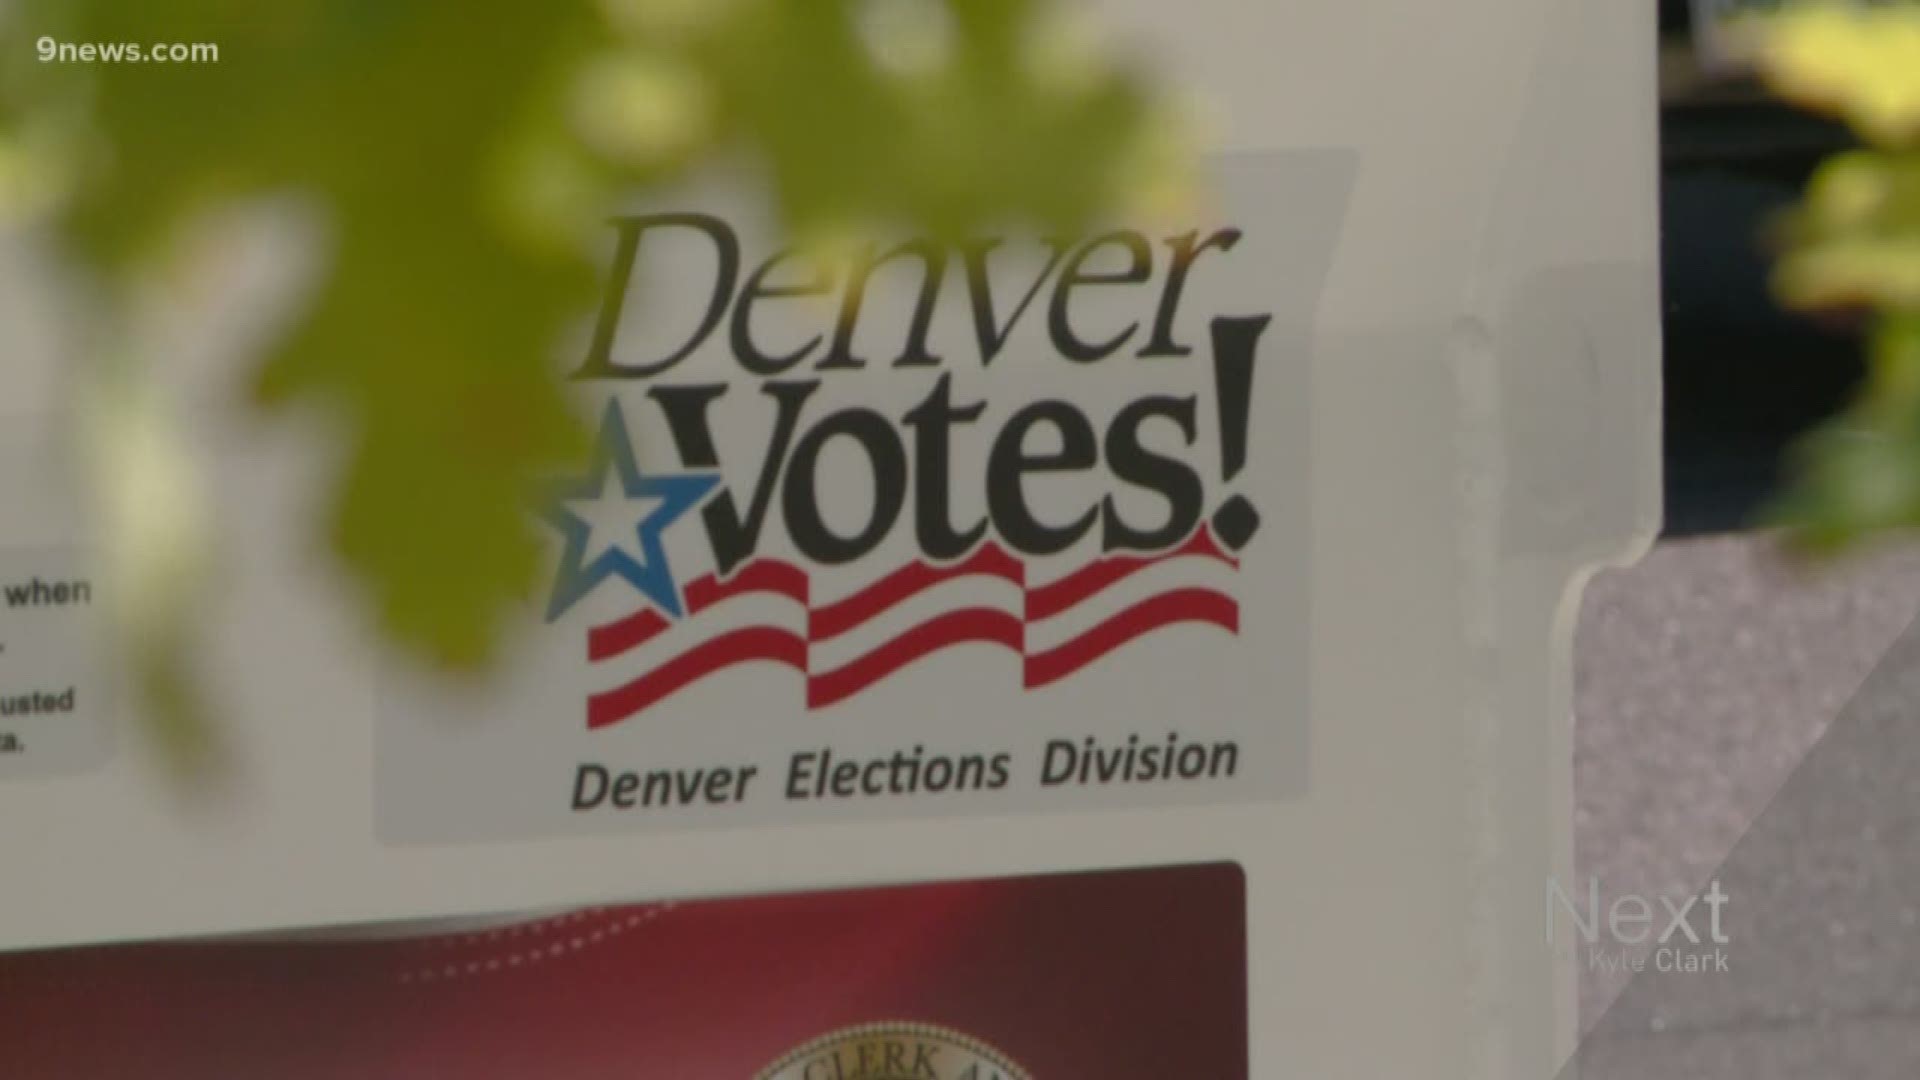 Denver's election division found gaps when it comes to accessing ballot drop -off boxes in certain neighborhoods.